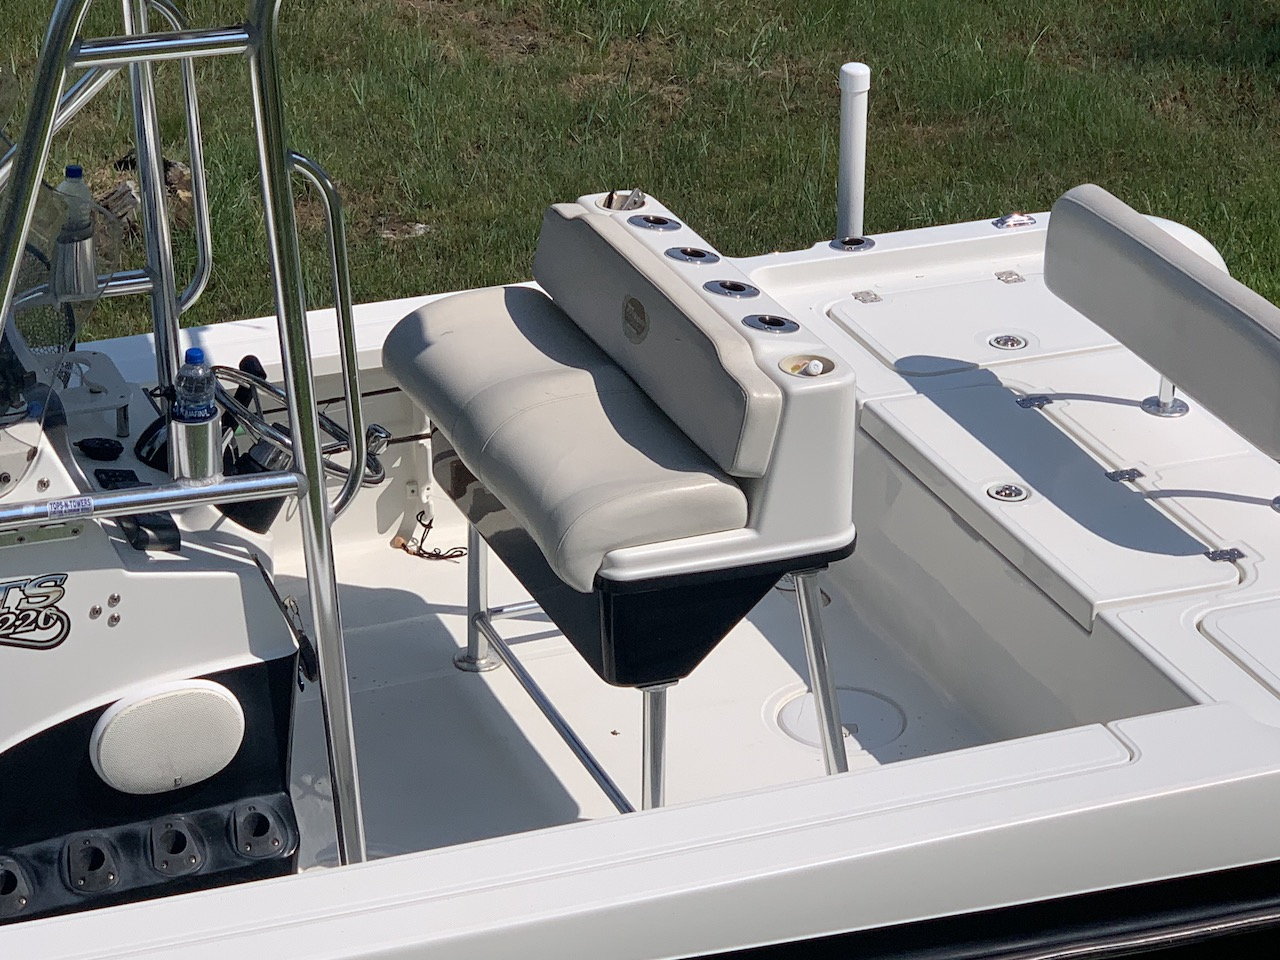 Bolstered Seats - The Hull Truth - Boating and Fishing Forum